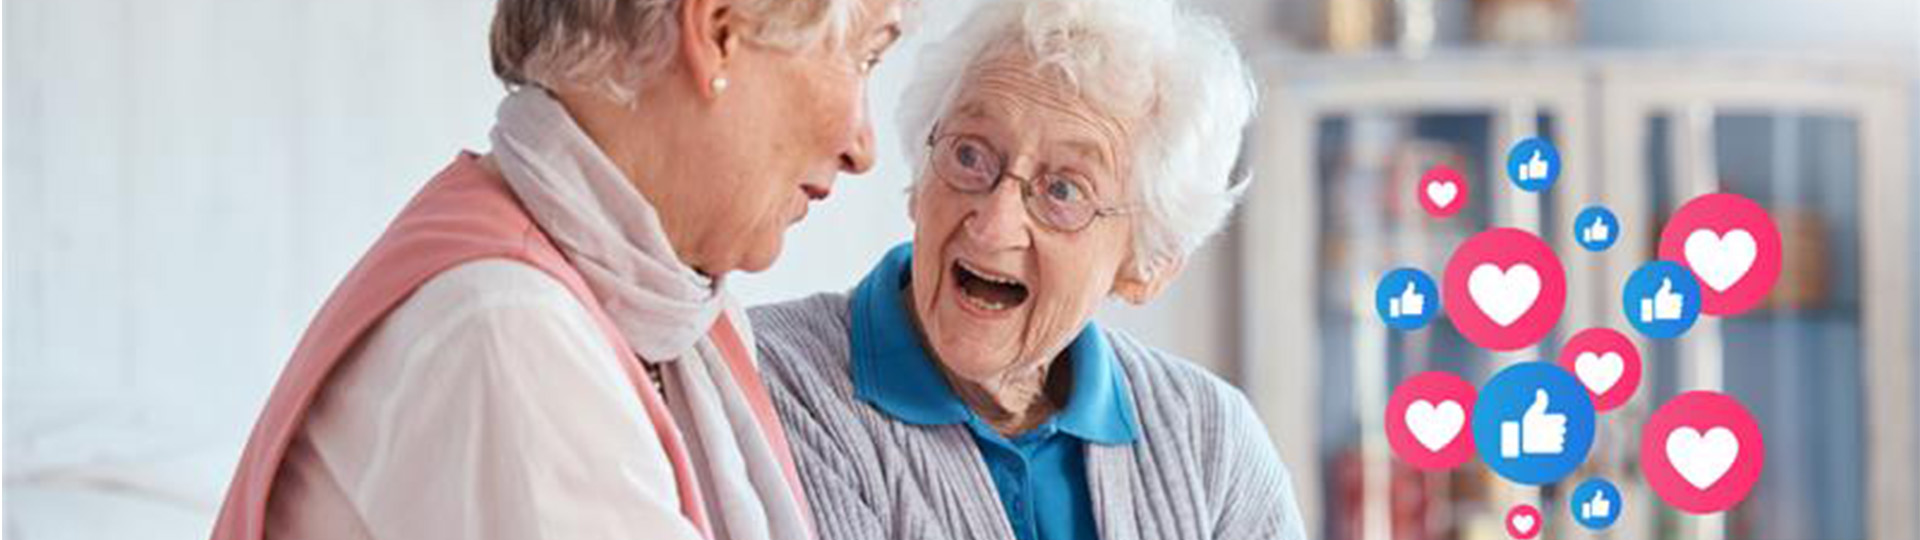 What kind of content should senior living communities post on social media?